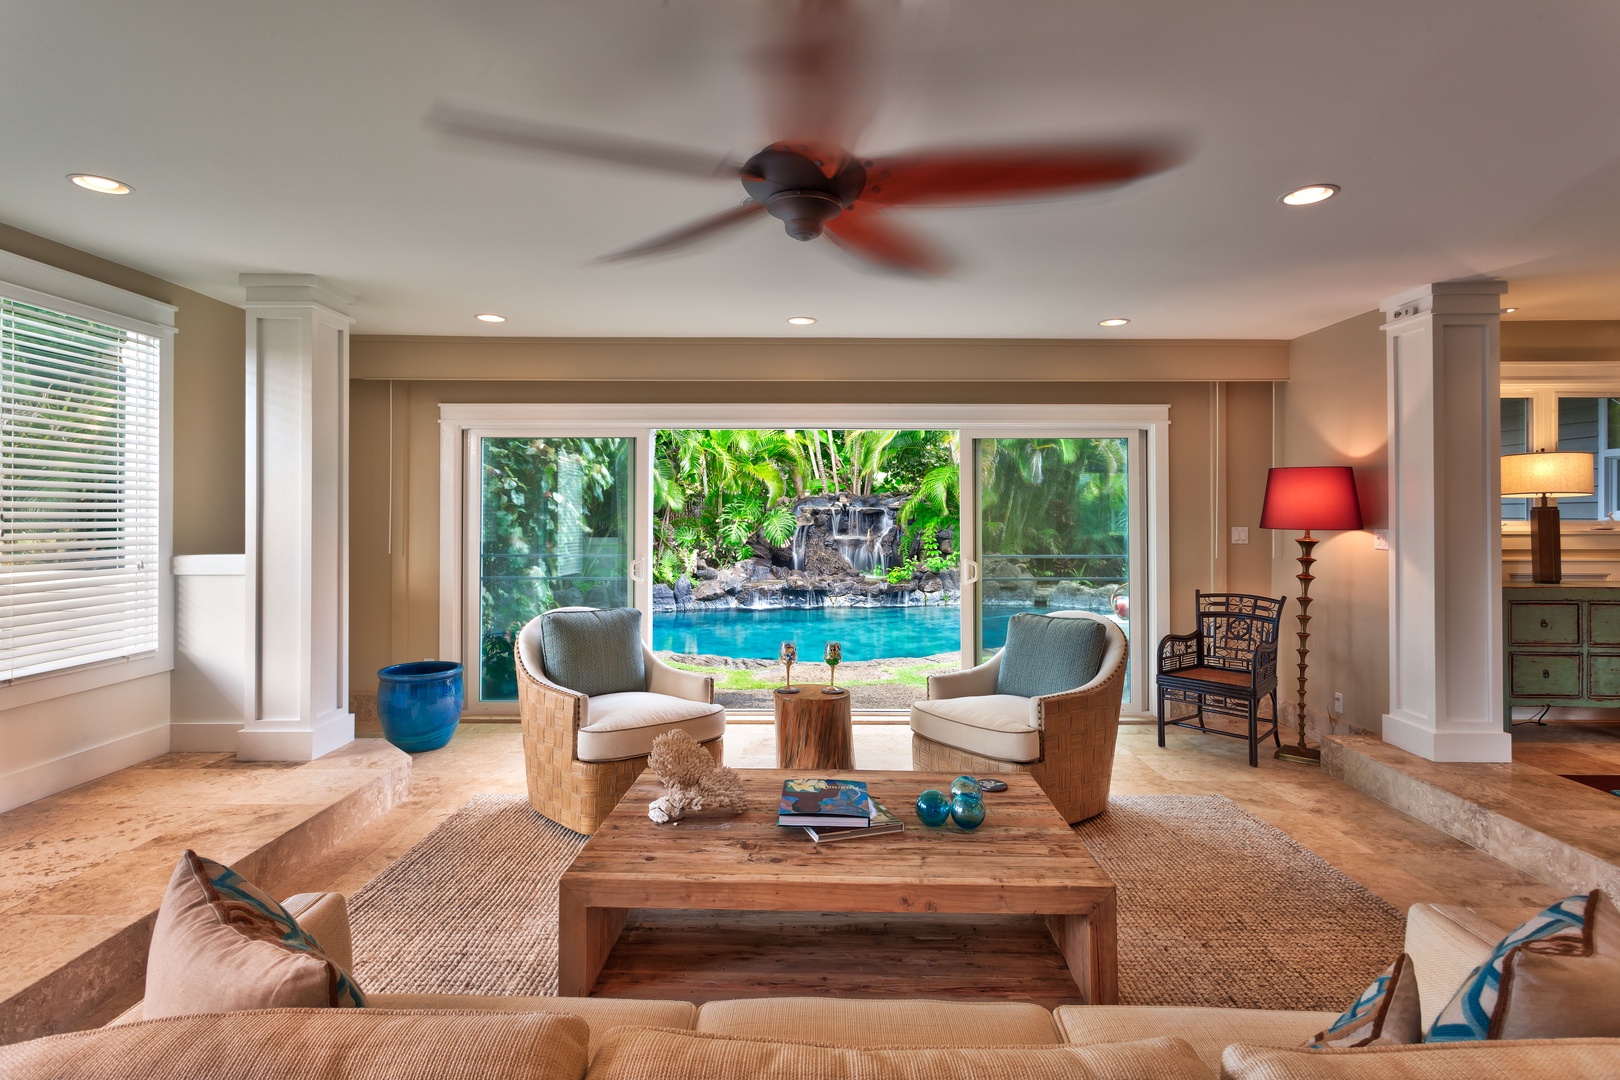 Kailua Vacation Rentals, Maluhia - Another view of the sitting room, with the dining room to the right.